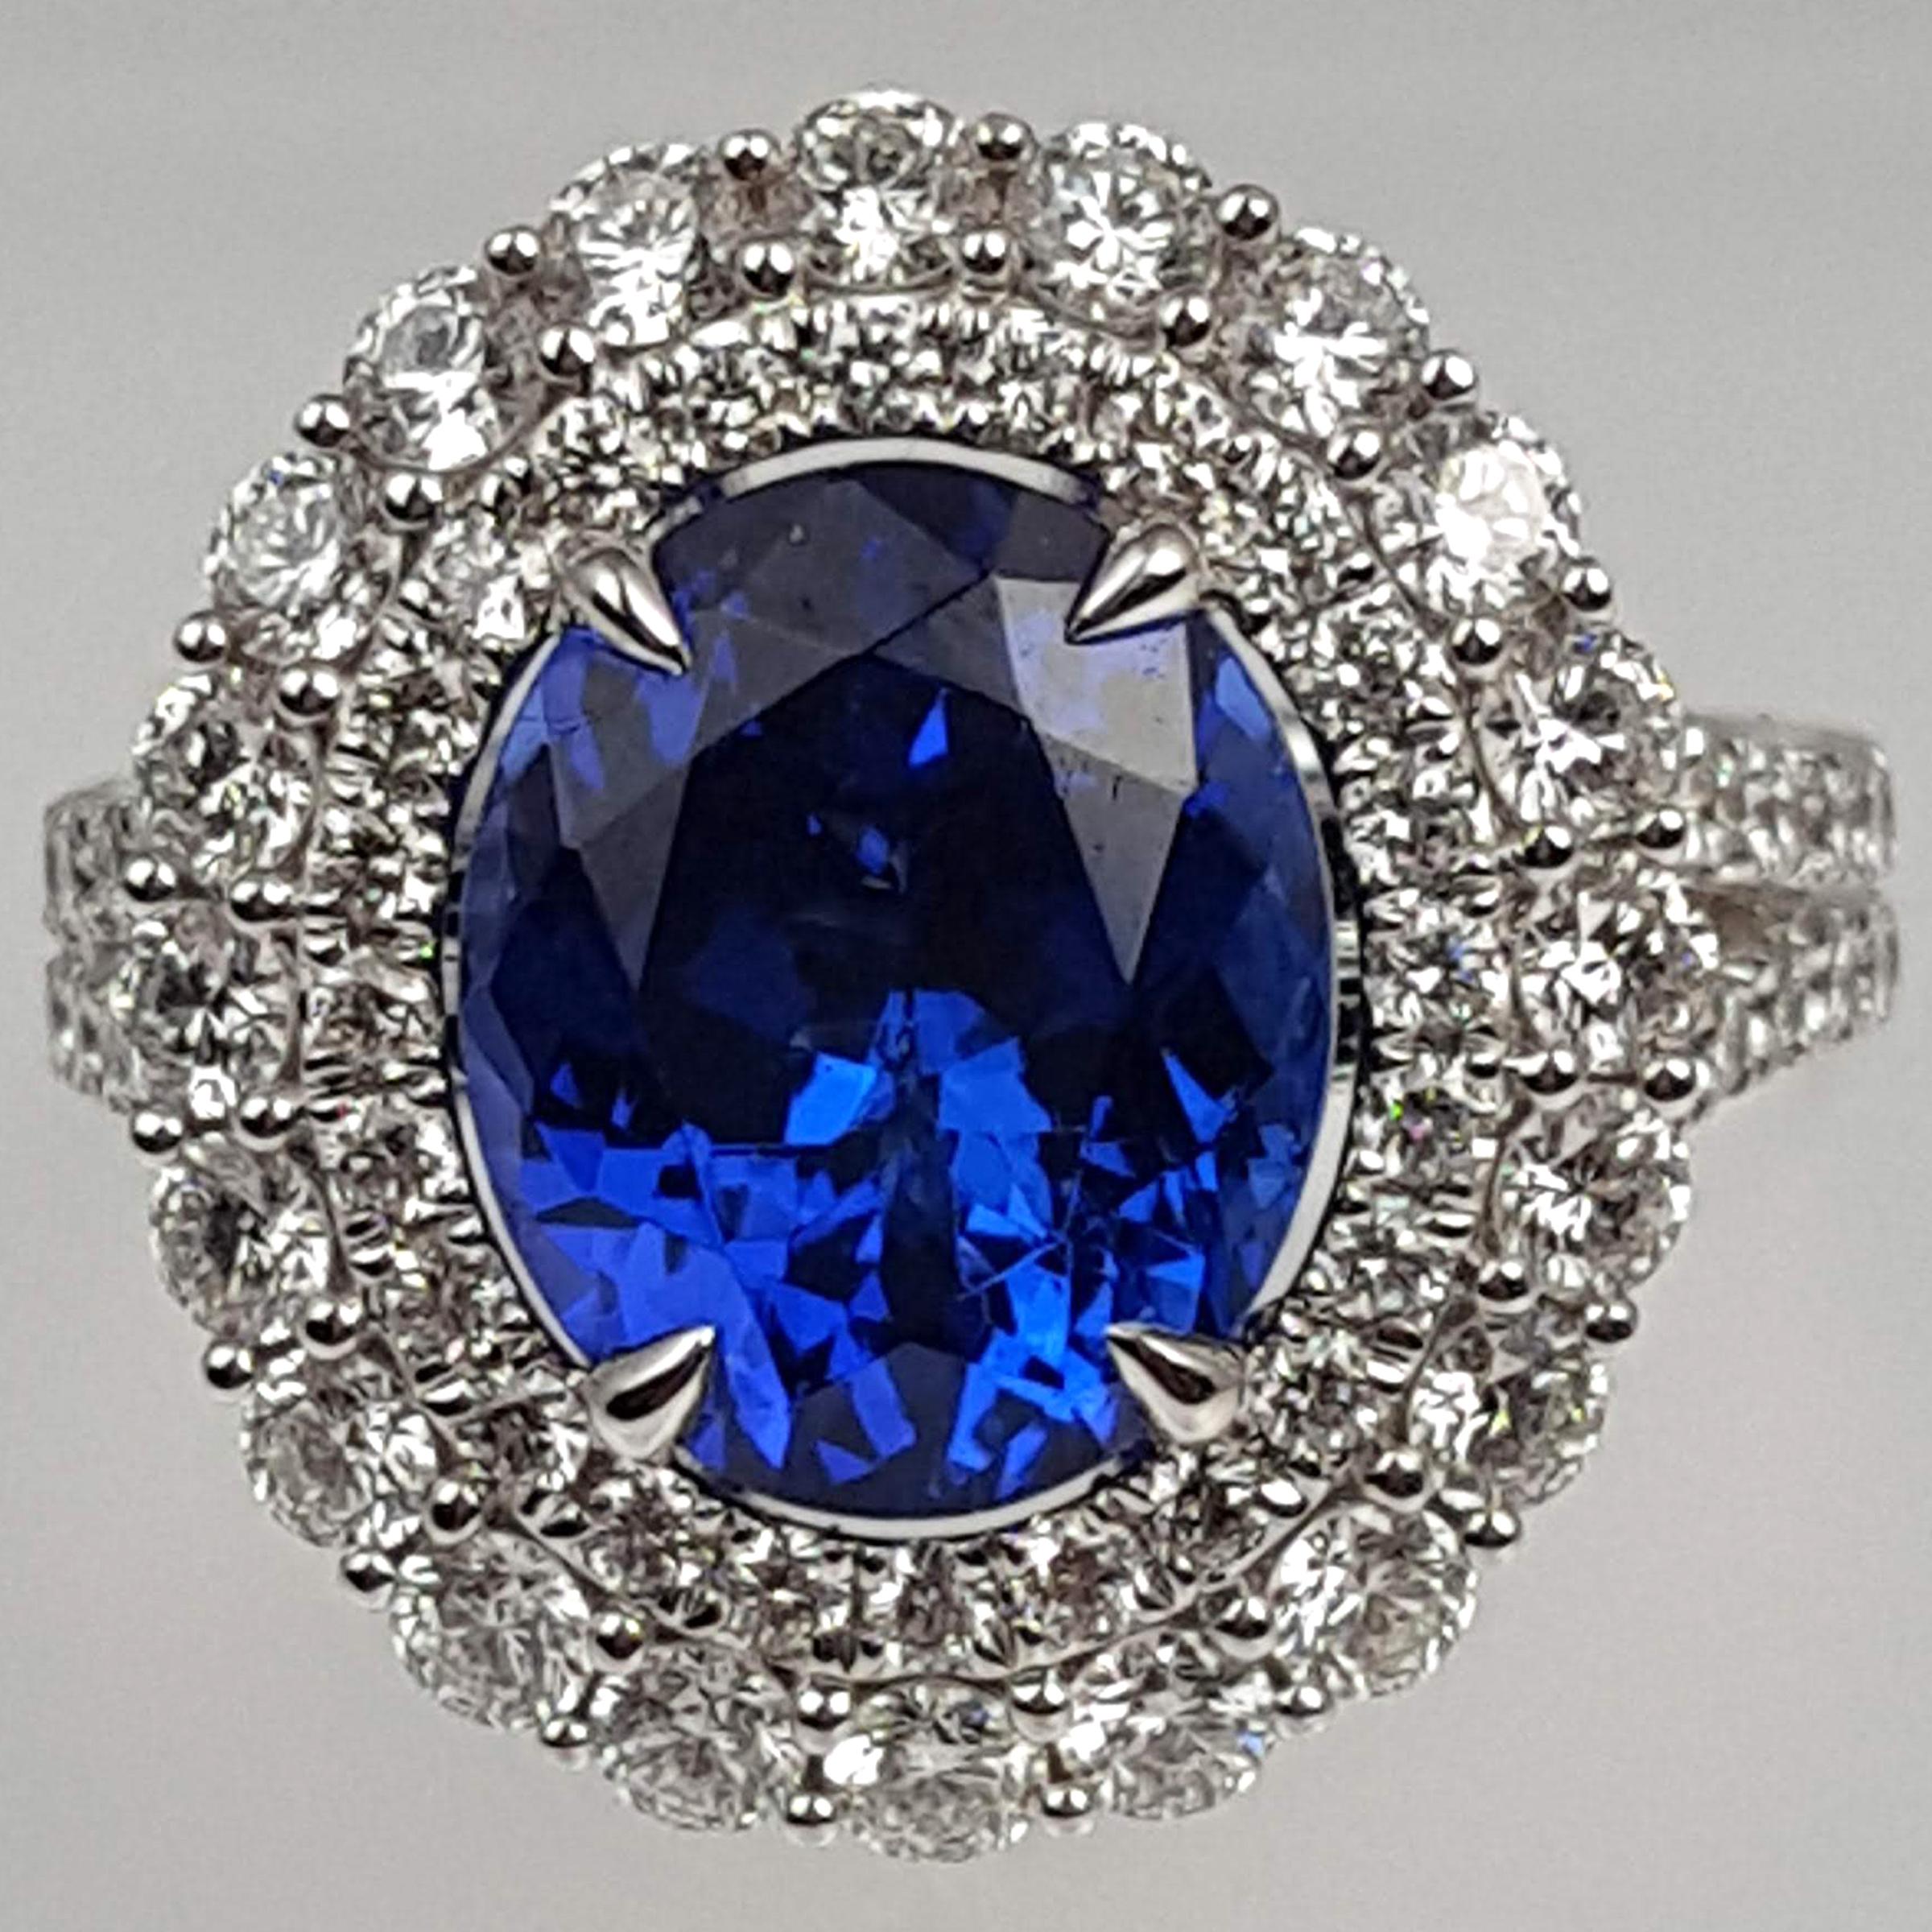 Featuring a GIA Certified 3.97 carat oval-cut tanzanite center and enveloped by a double halo of 1.89 carats of white diamonds, this ring radiates brilliance from every perspective. The intricate hand-engraved milgrain work throughout the piece